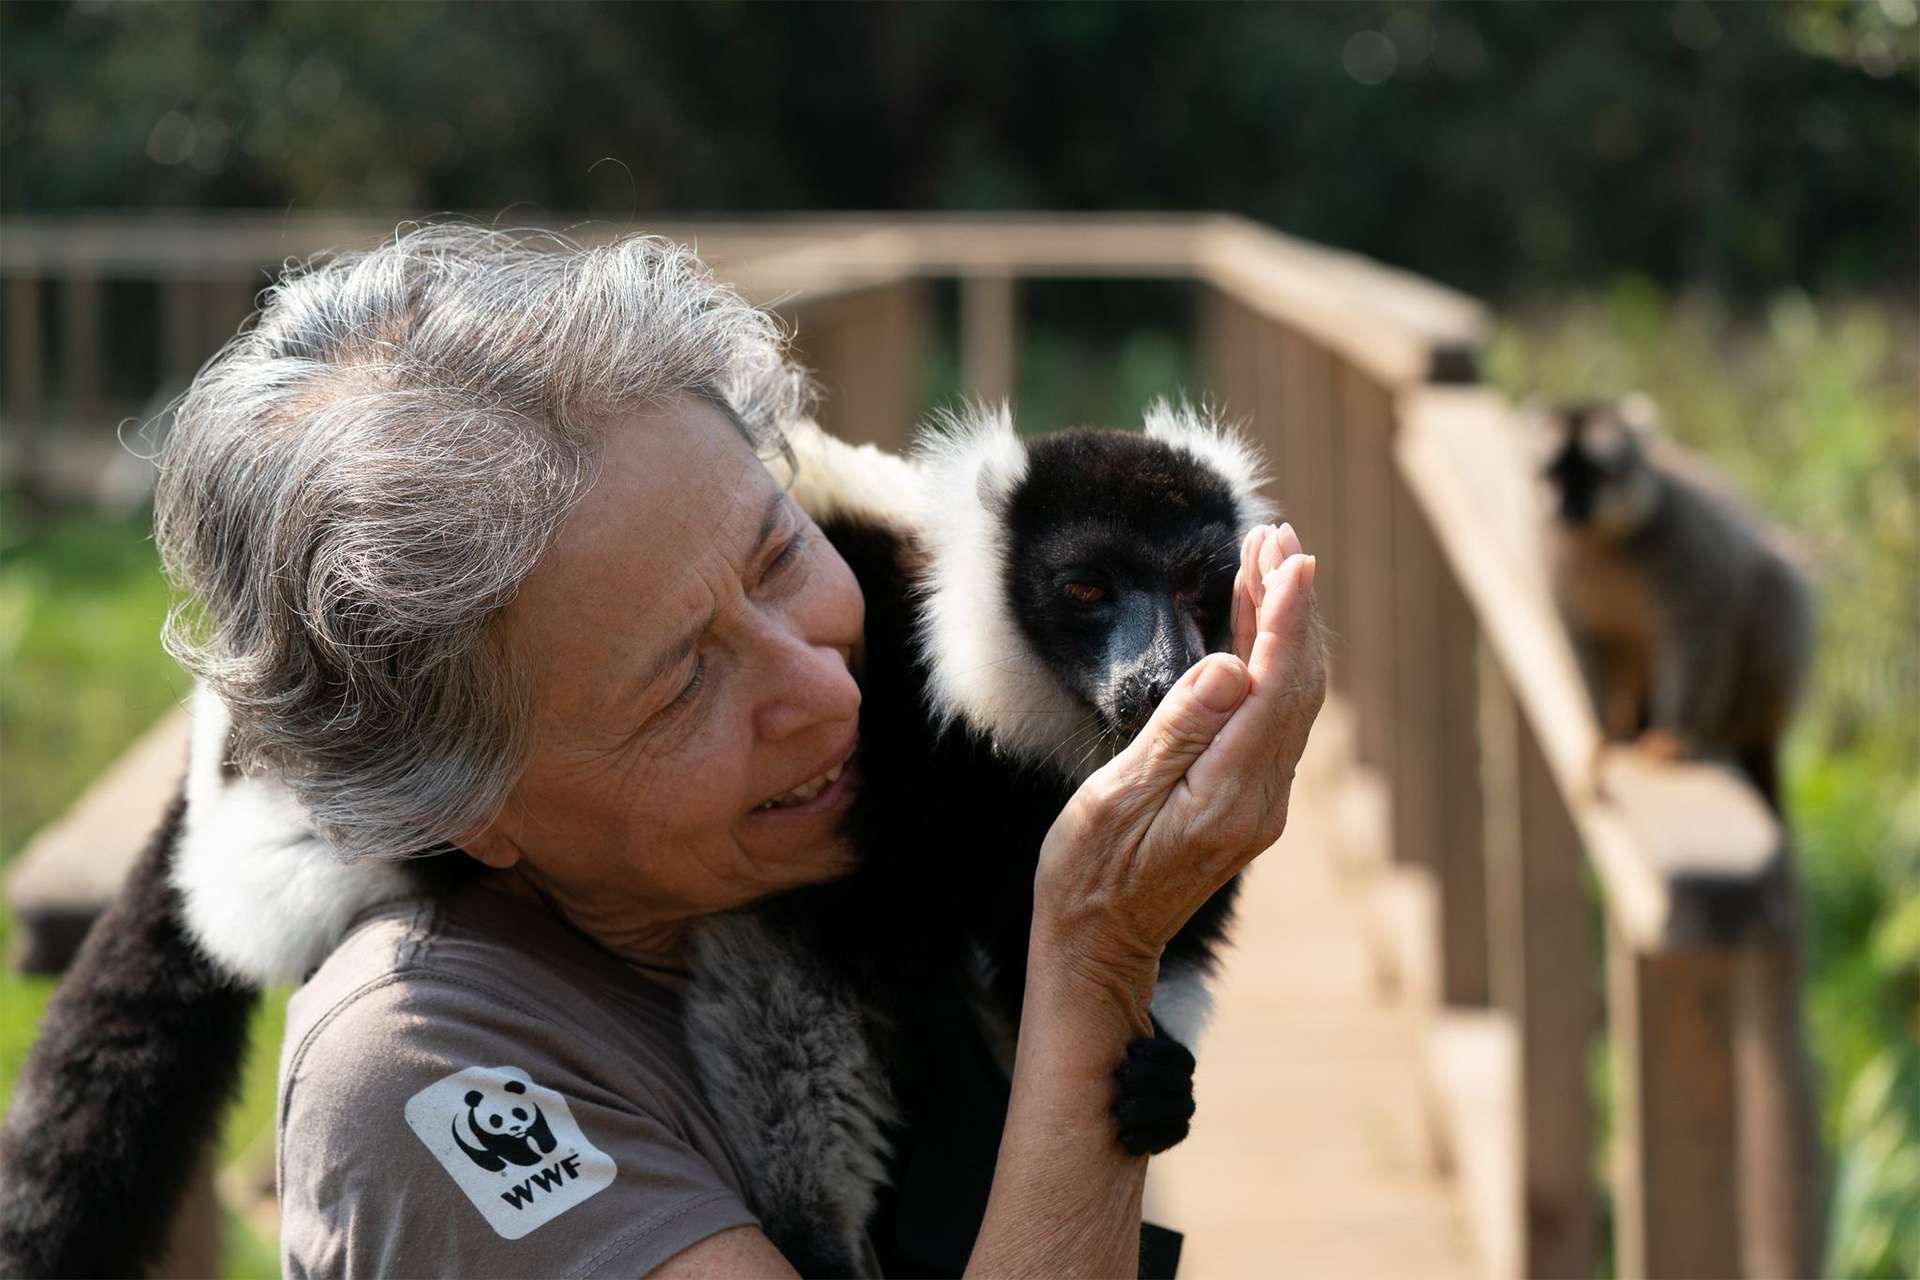 A tender moment shared by a WWF expert and a lemur in Madagascar